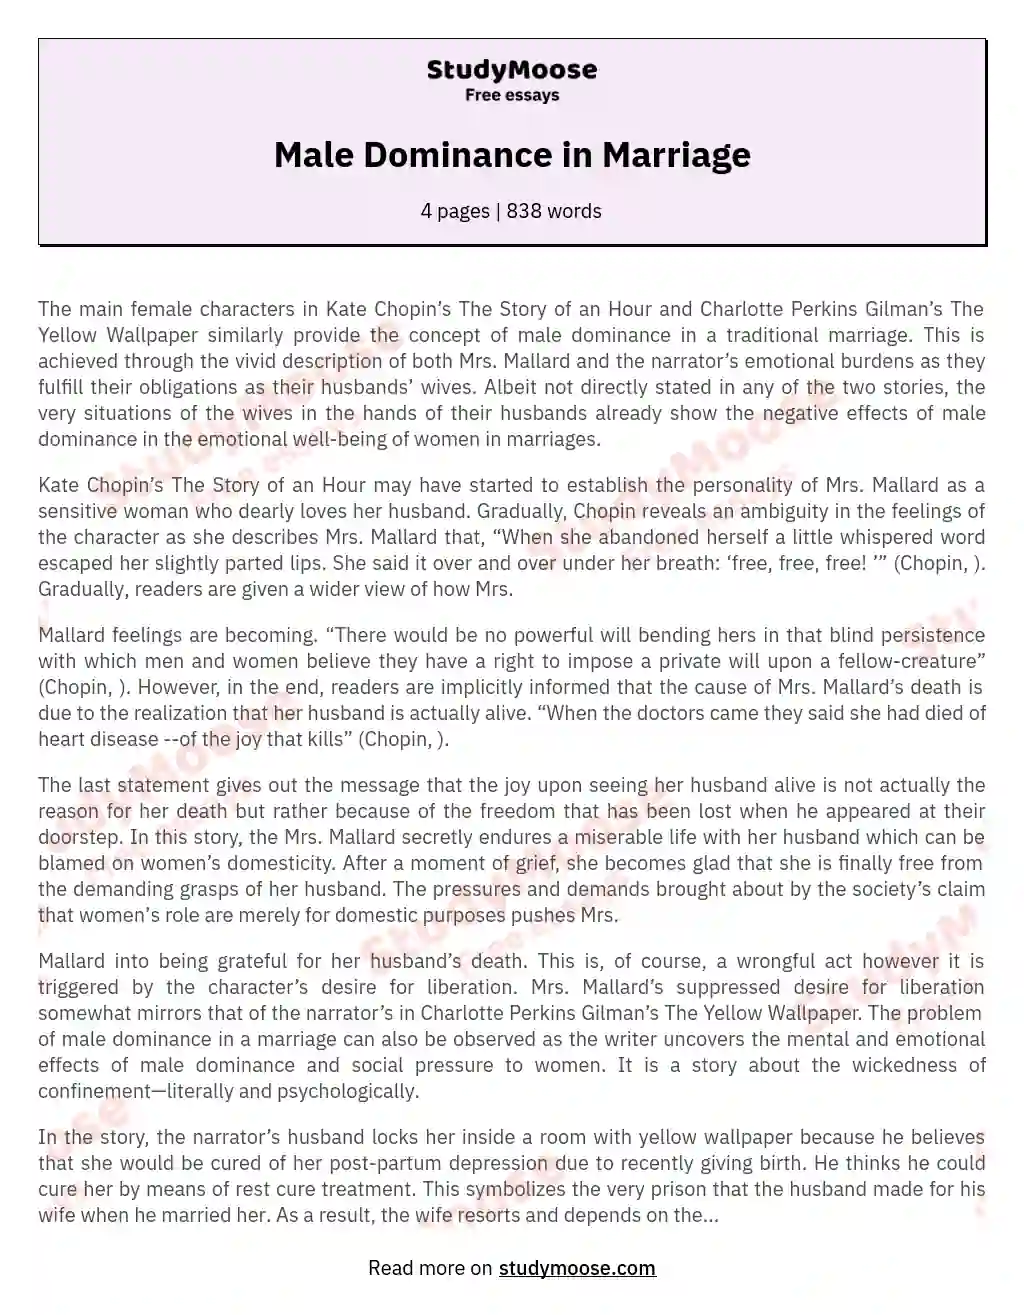 Male Dominance in Marriage essay